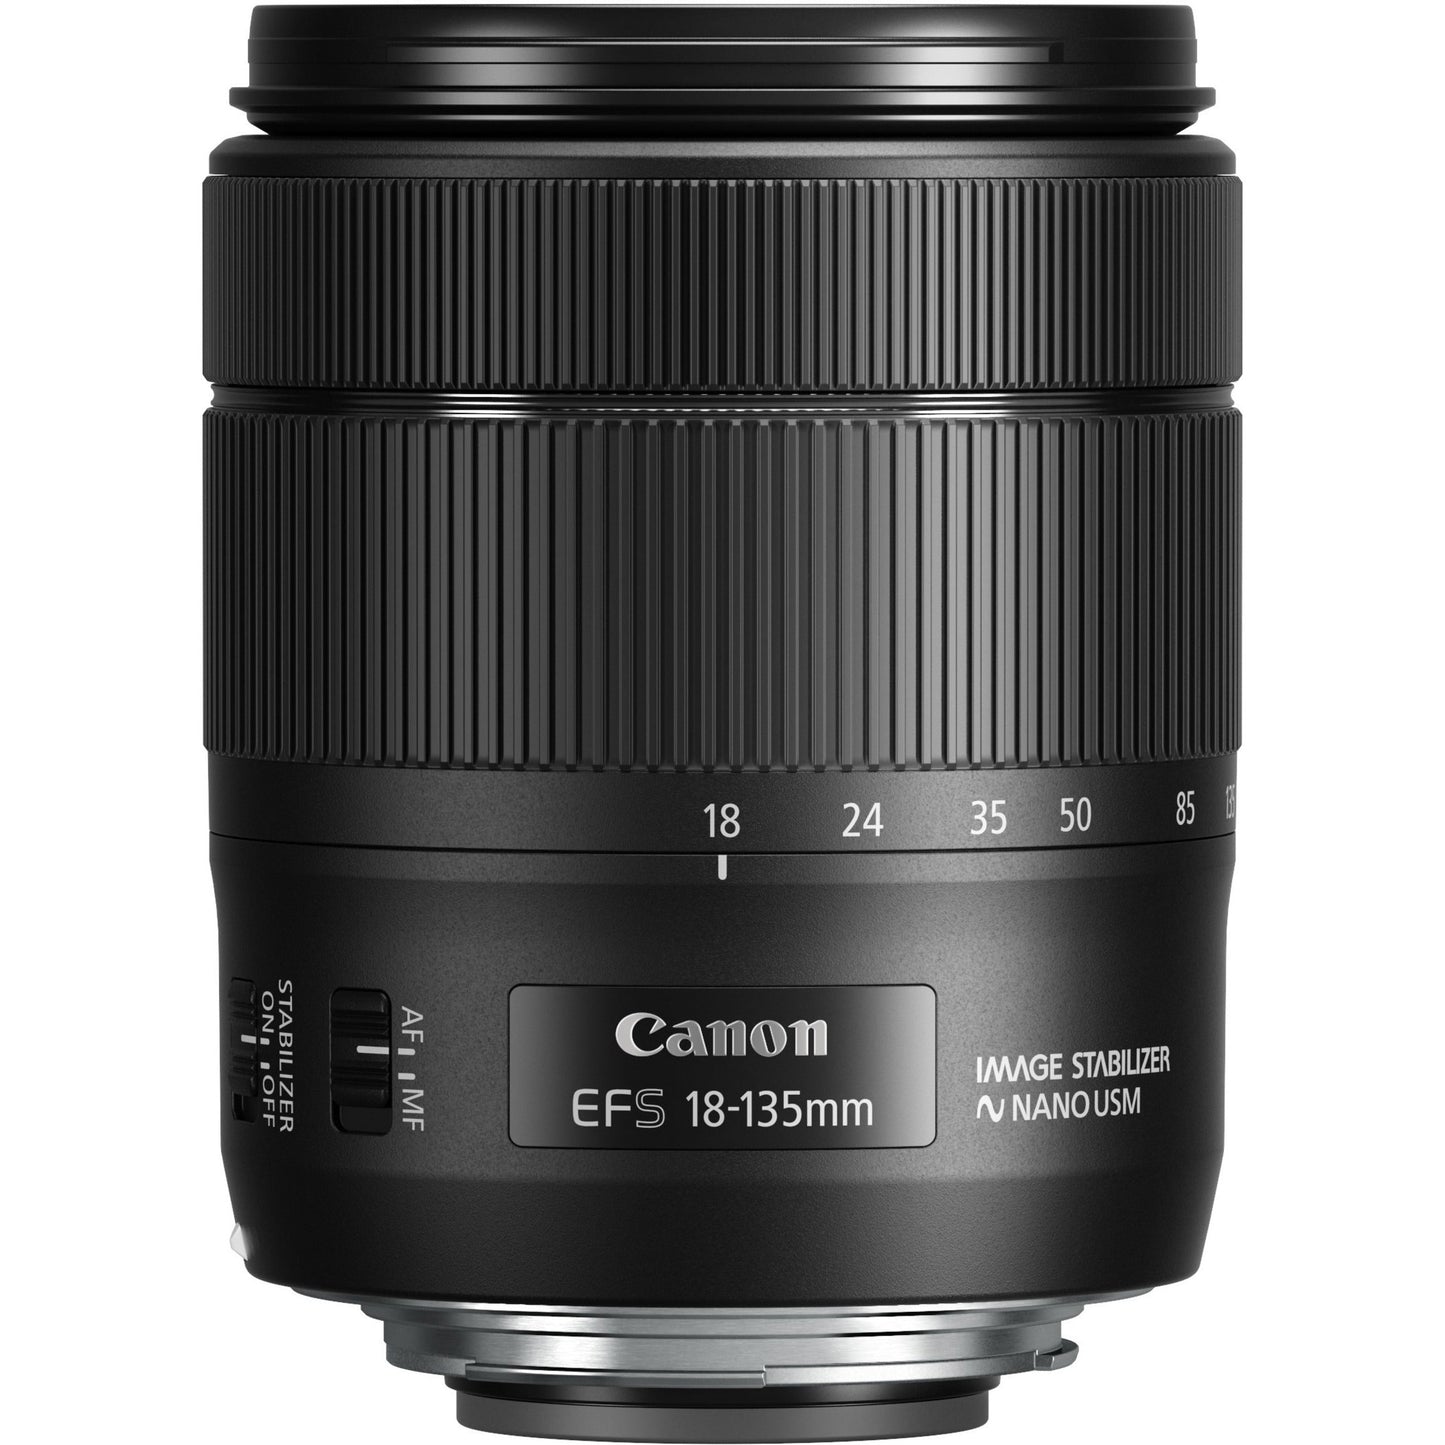 Canon - 18 mm to 135 mmf/5.6 - Standard Zoom Lens for Canon EF-S